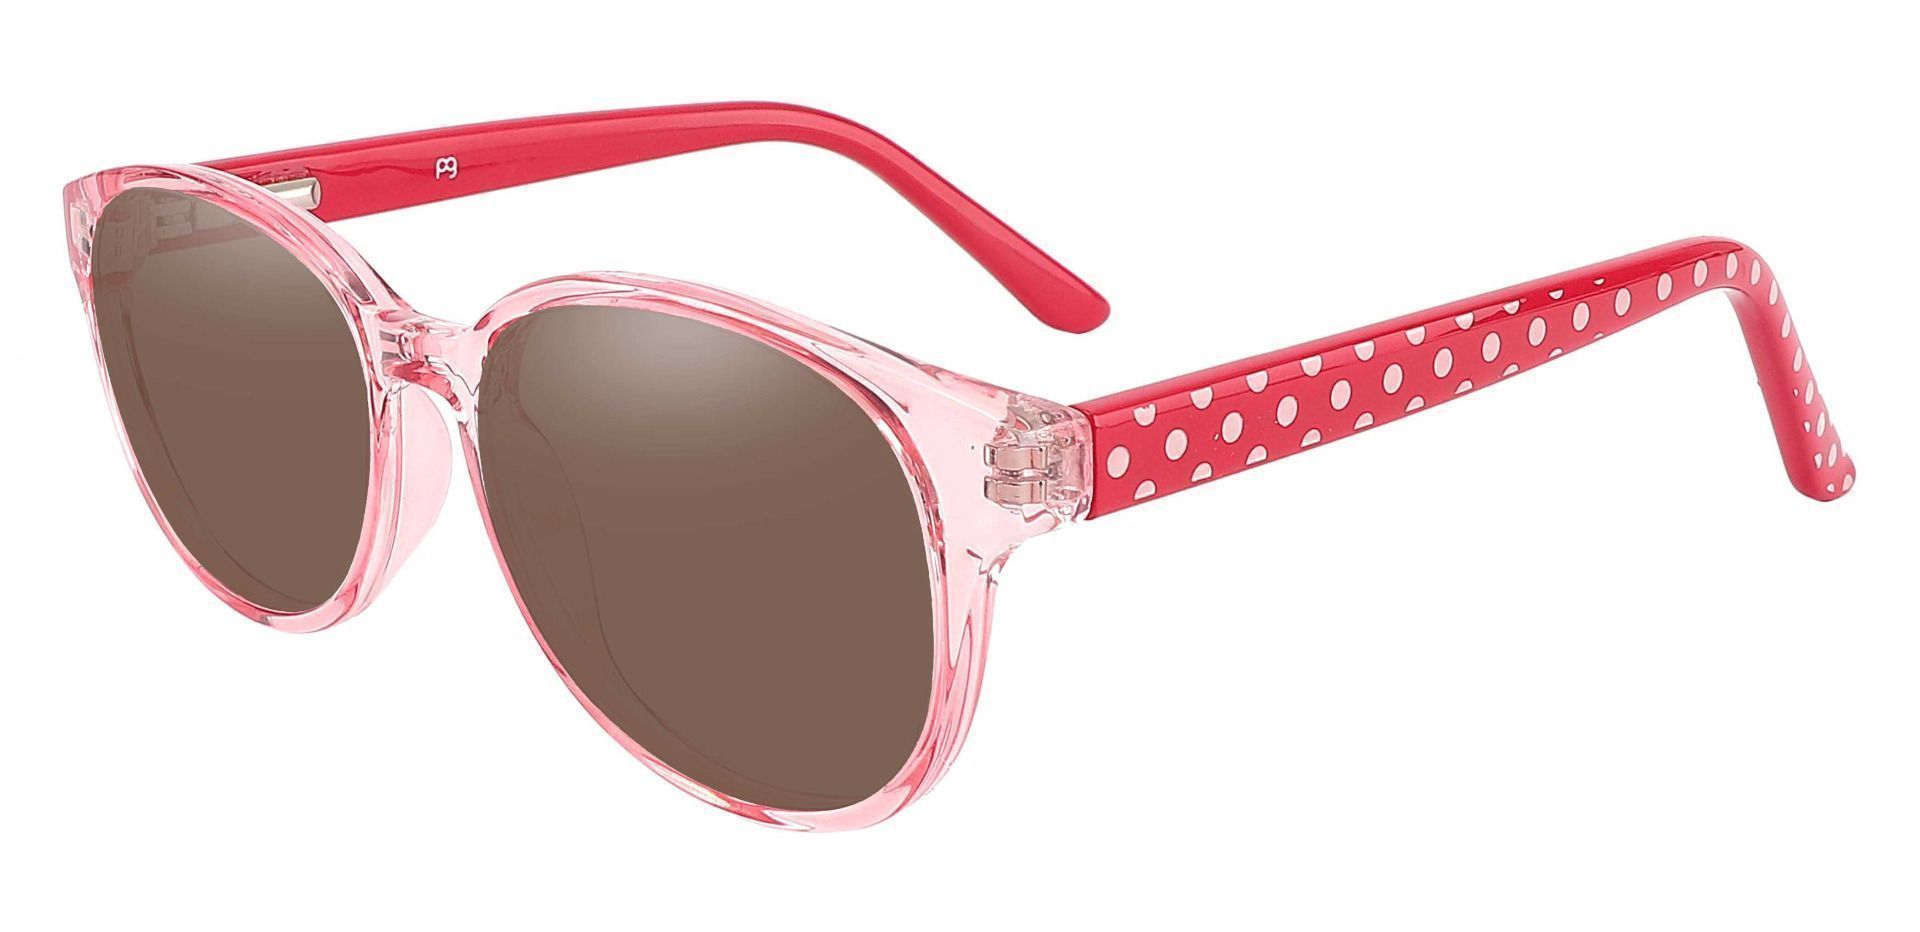 Libby Oval Prescription Sunglasses - Pink Frame With Brown Lenses